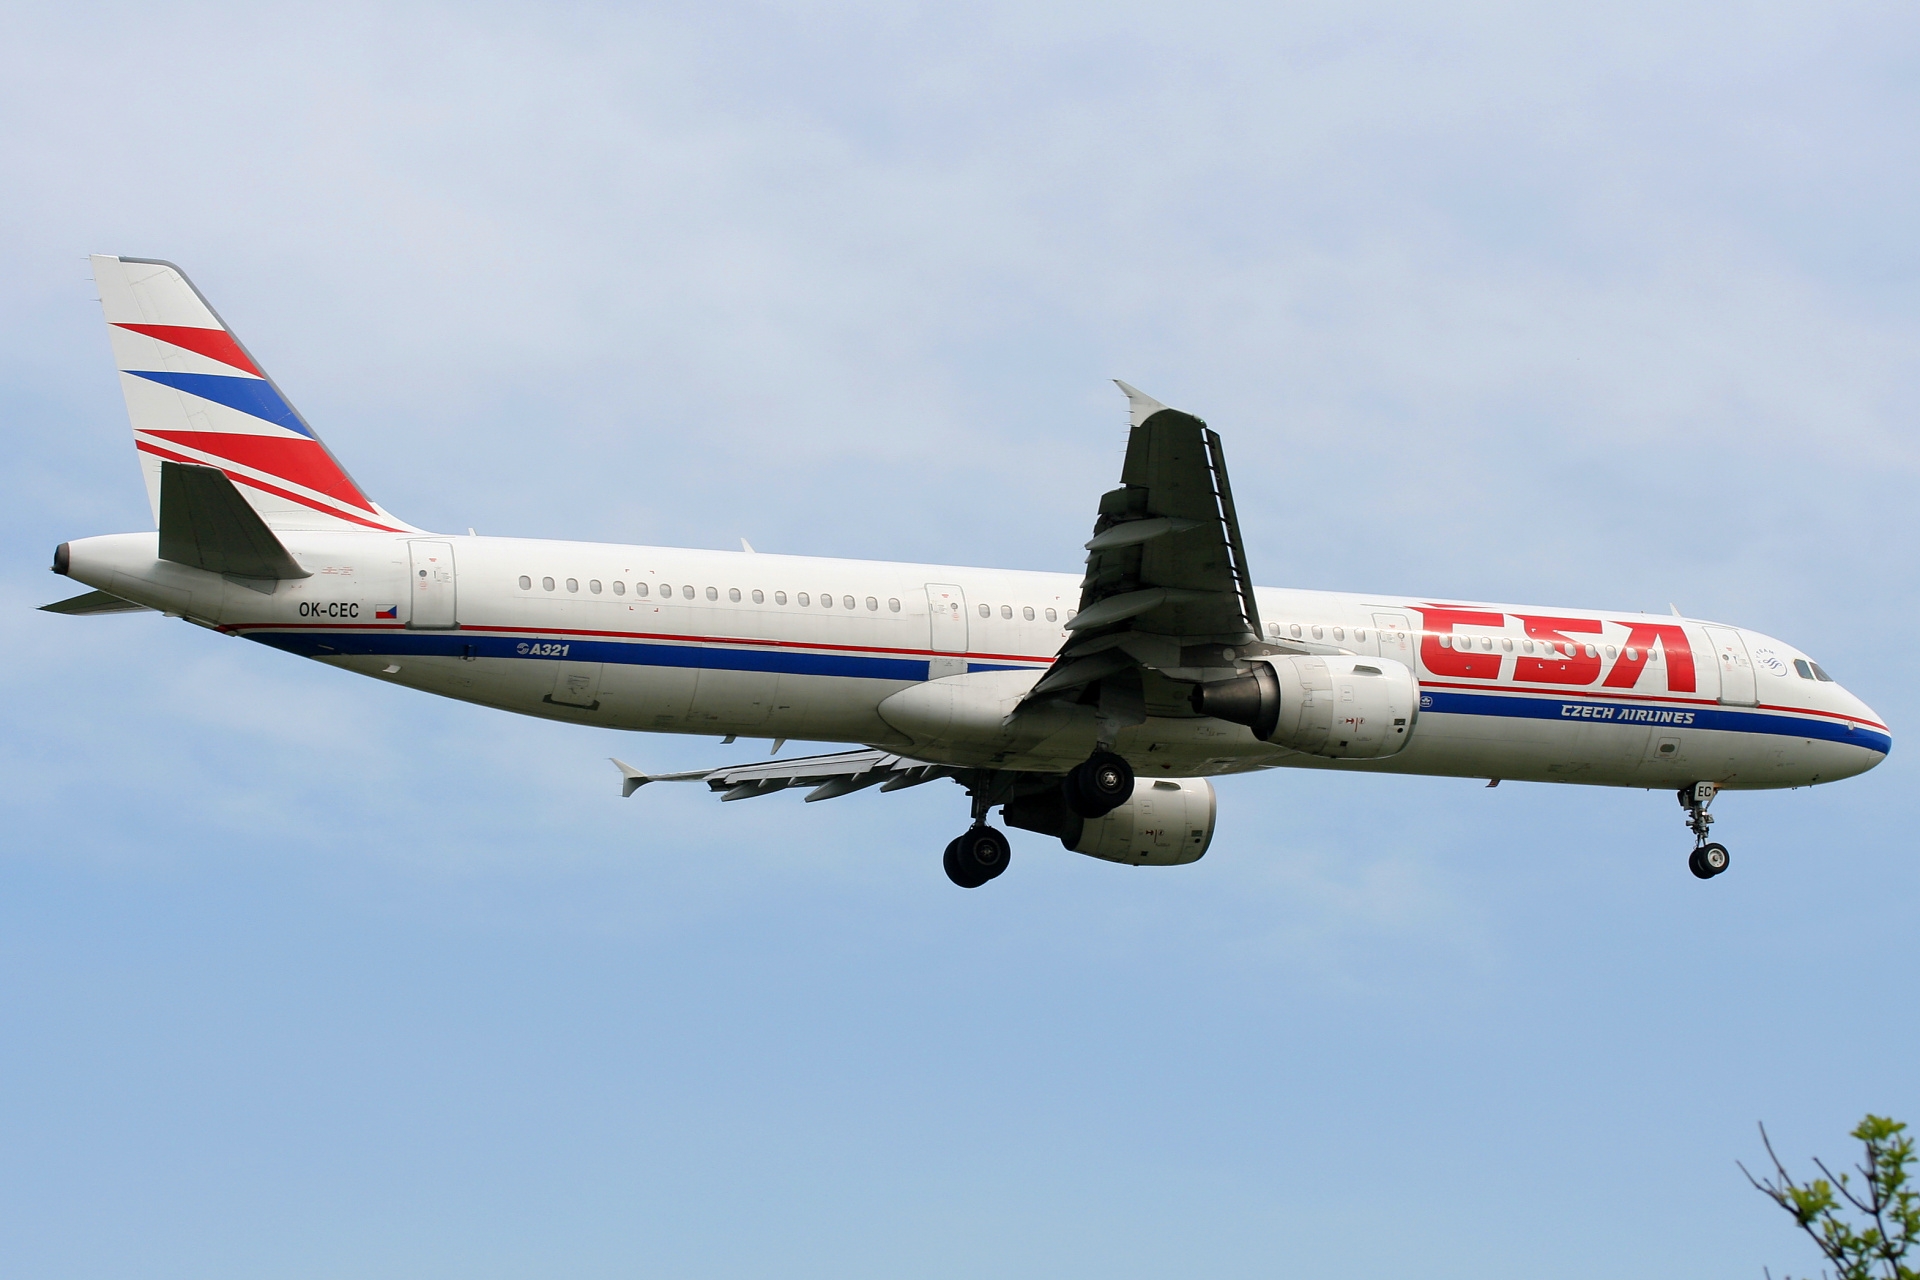 OK-CEC, CSA Czech Airlines (Aircraft » EPWA Spotting » Airbus A321-200)